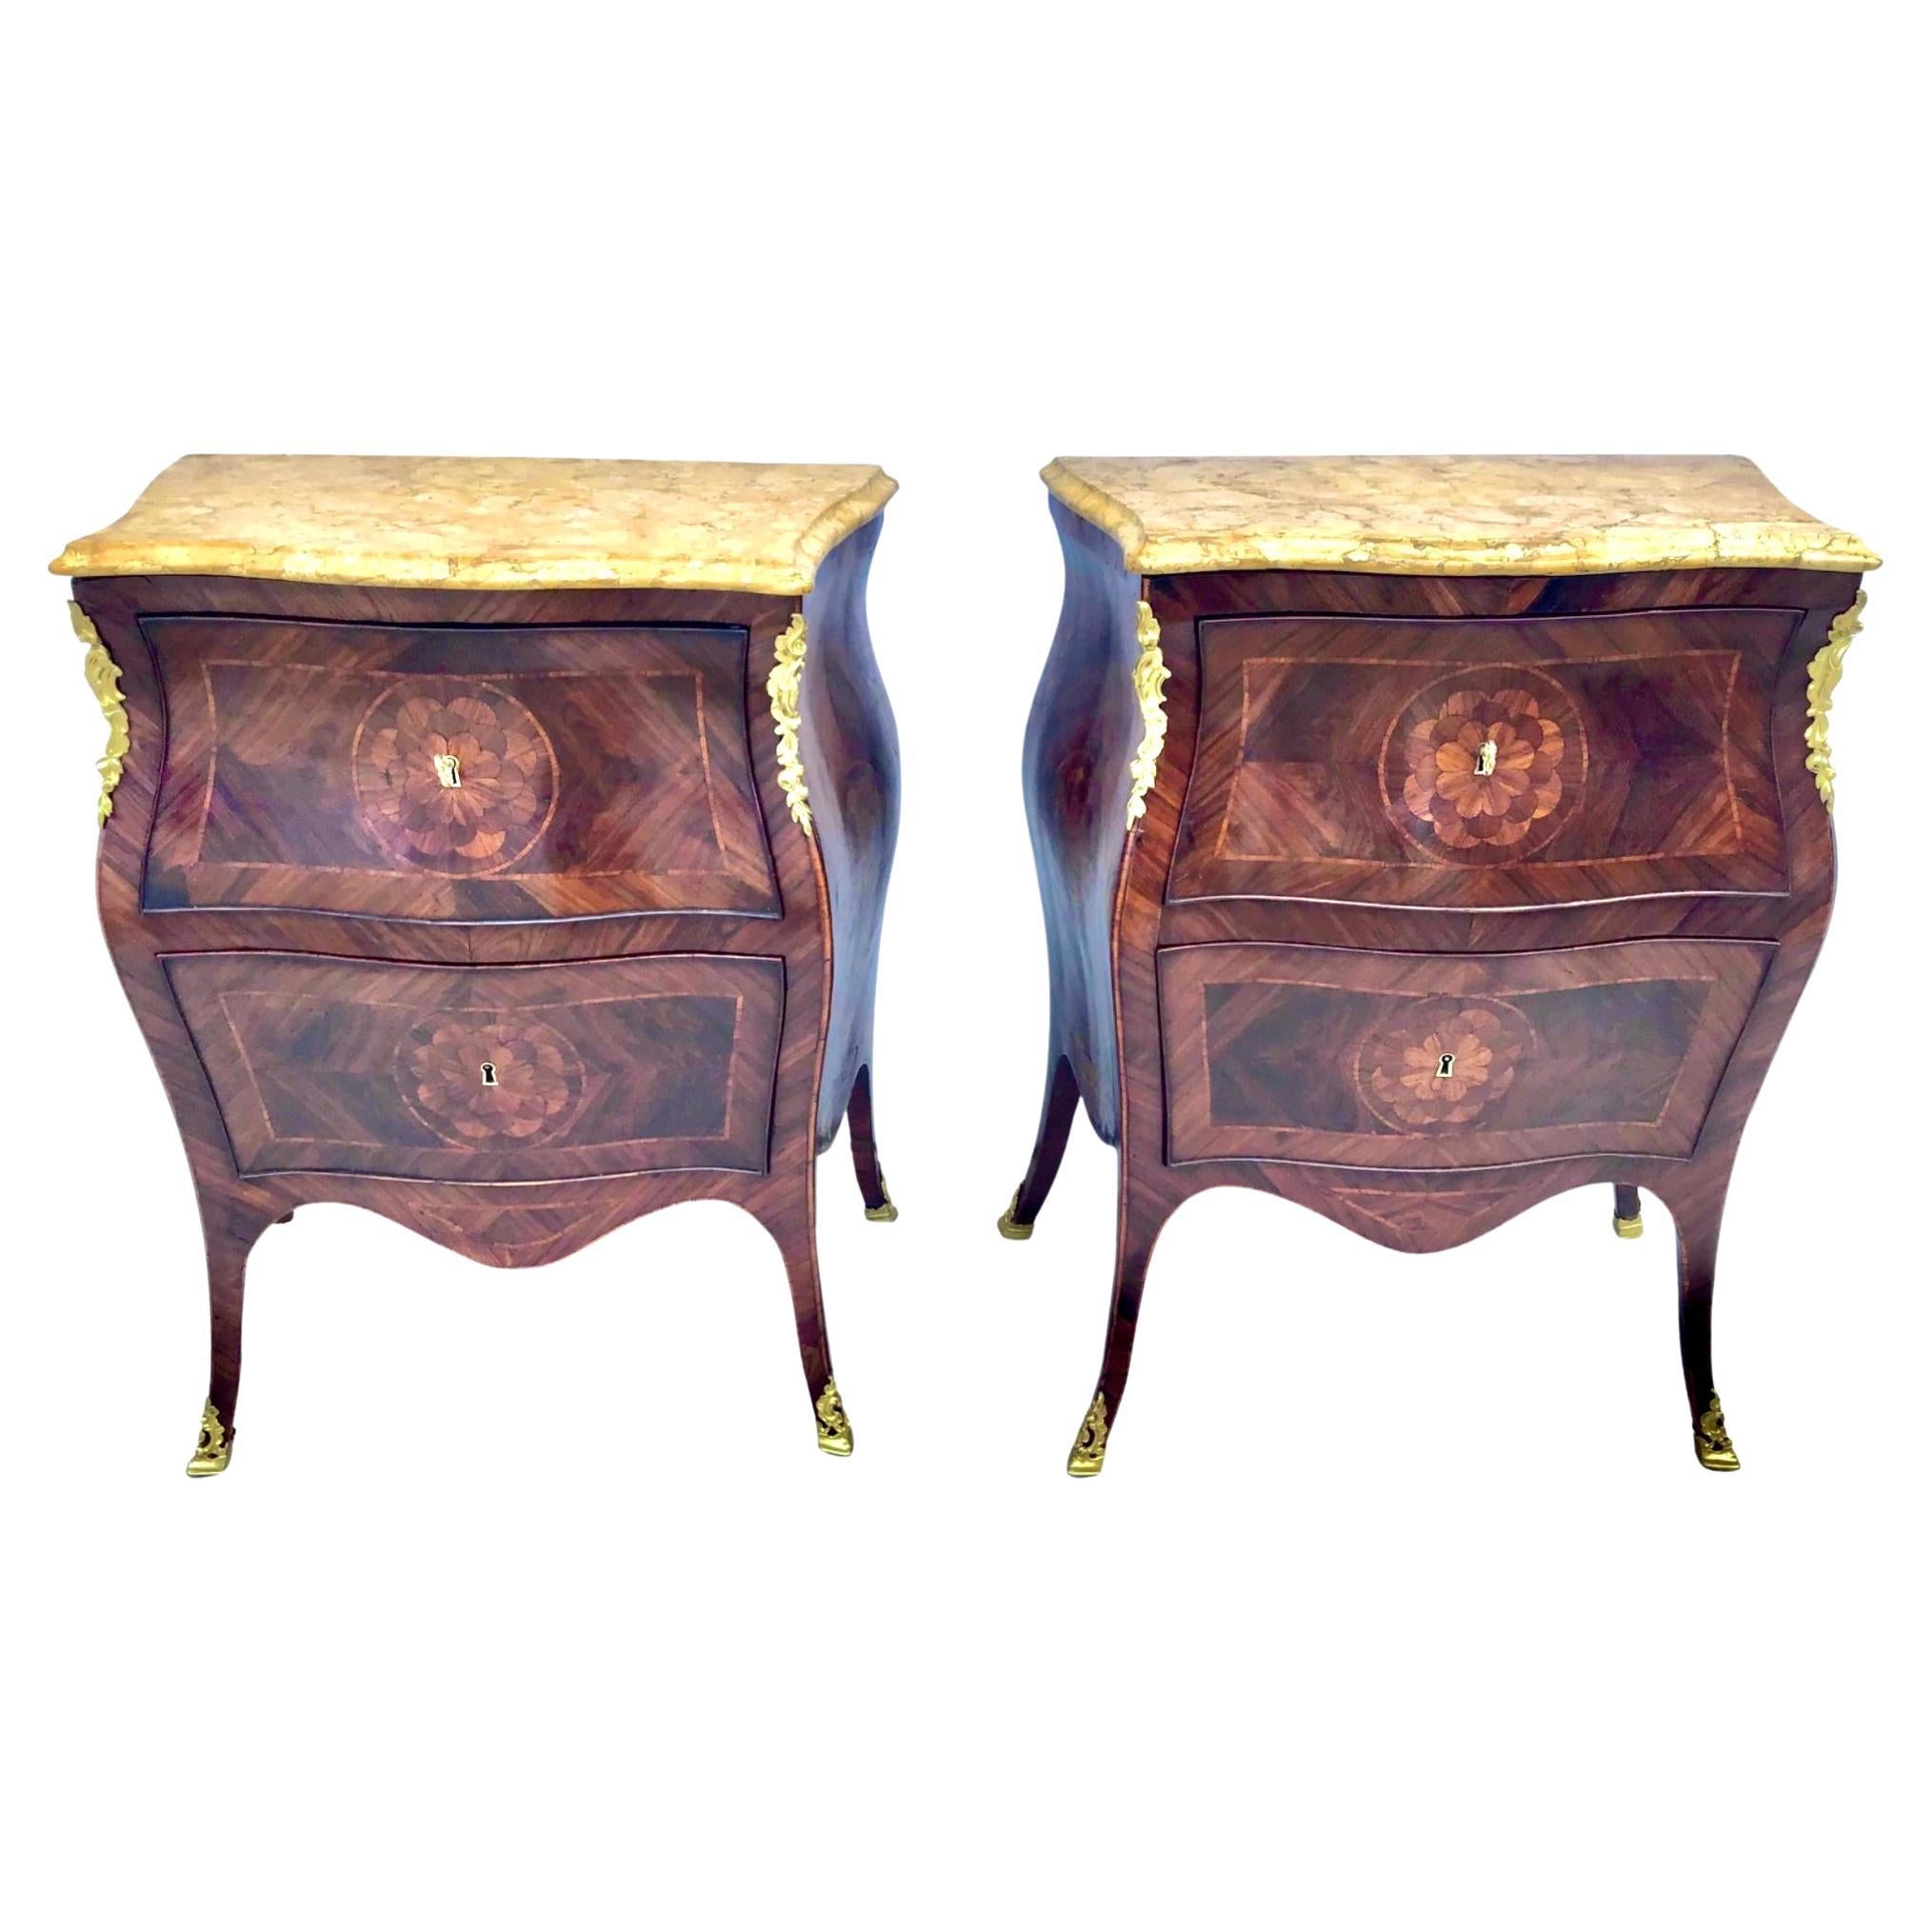  18th Century Italian Neapolitan Inlaid Nightstand Bed Side Tables Commodini For Sale